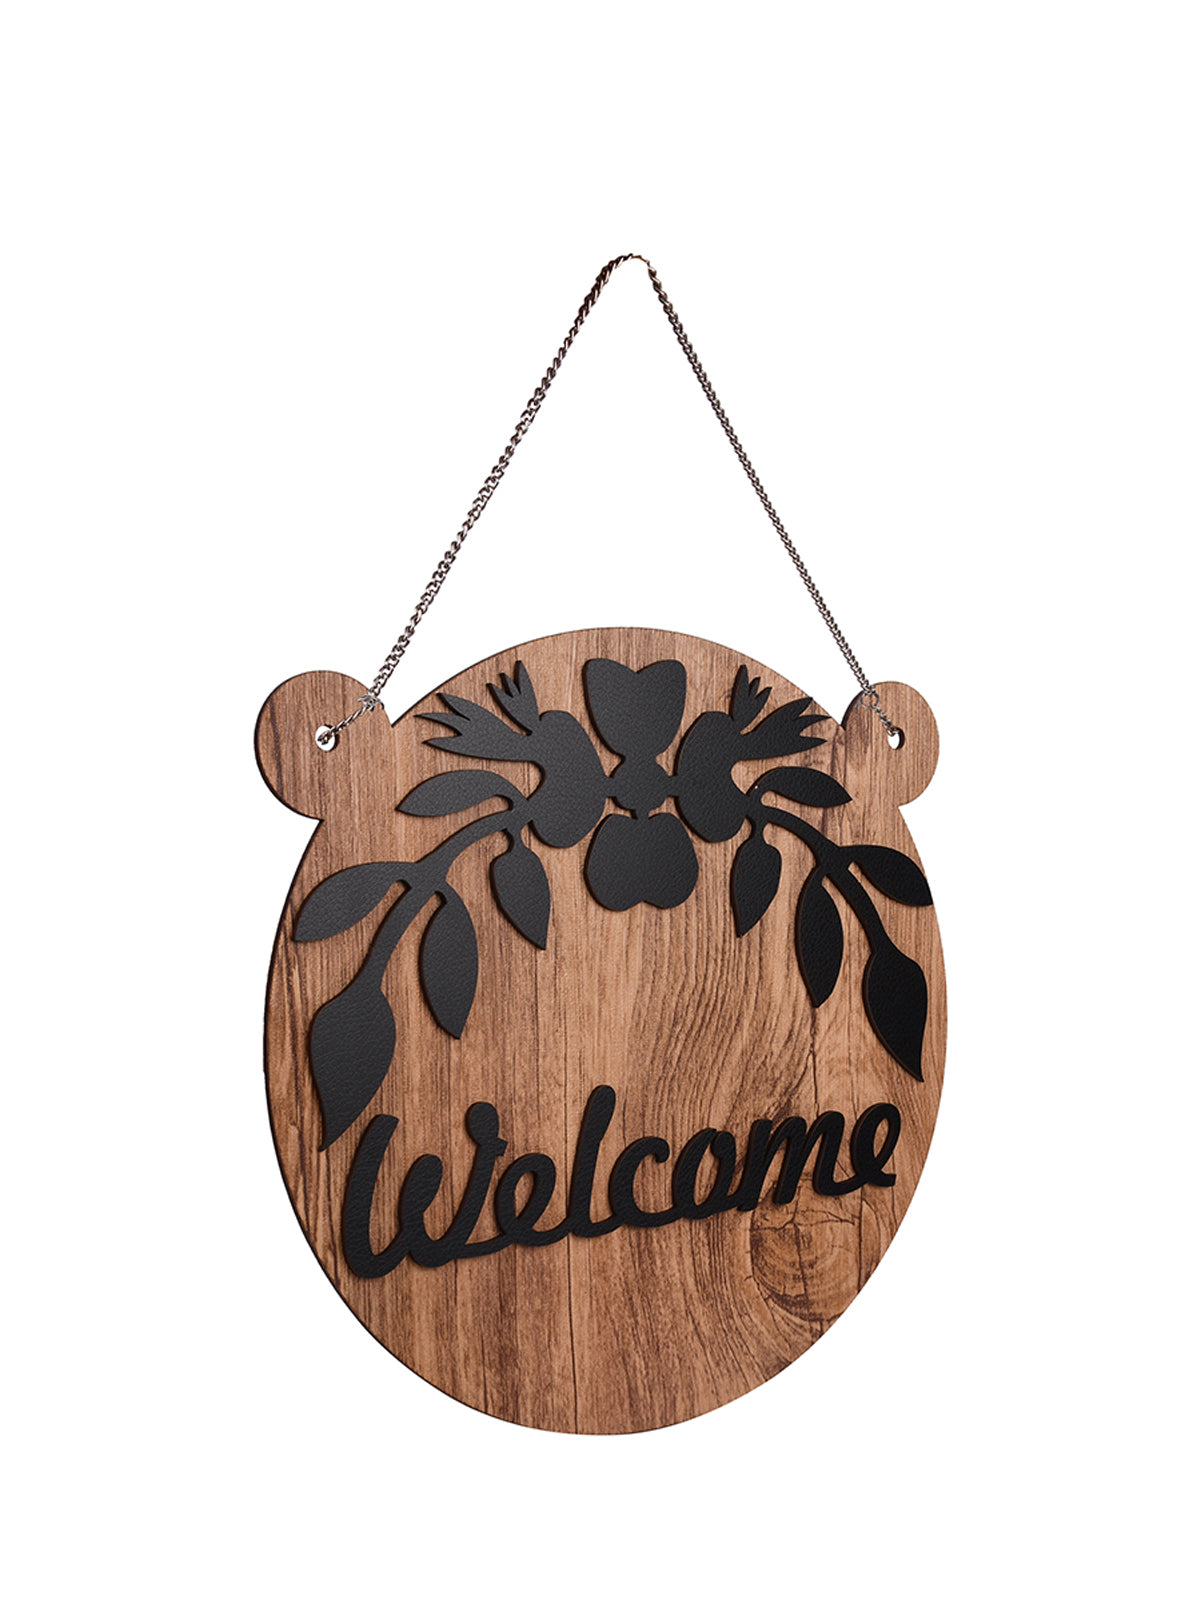 Welcome Round with Ear Wooden Wall Hanging